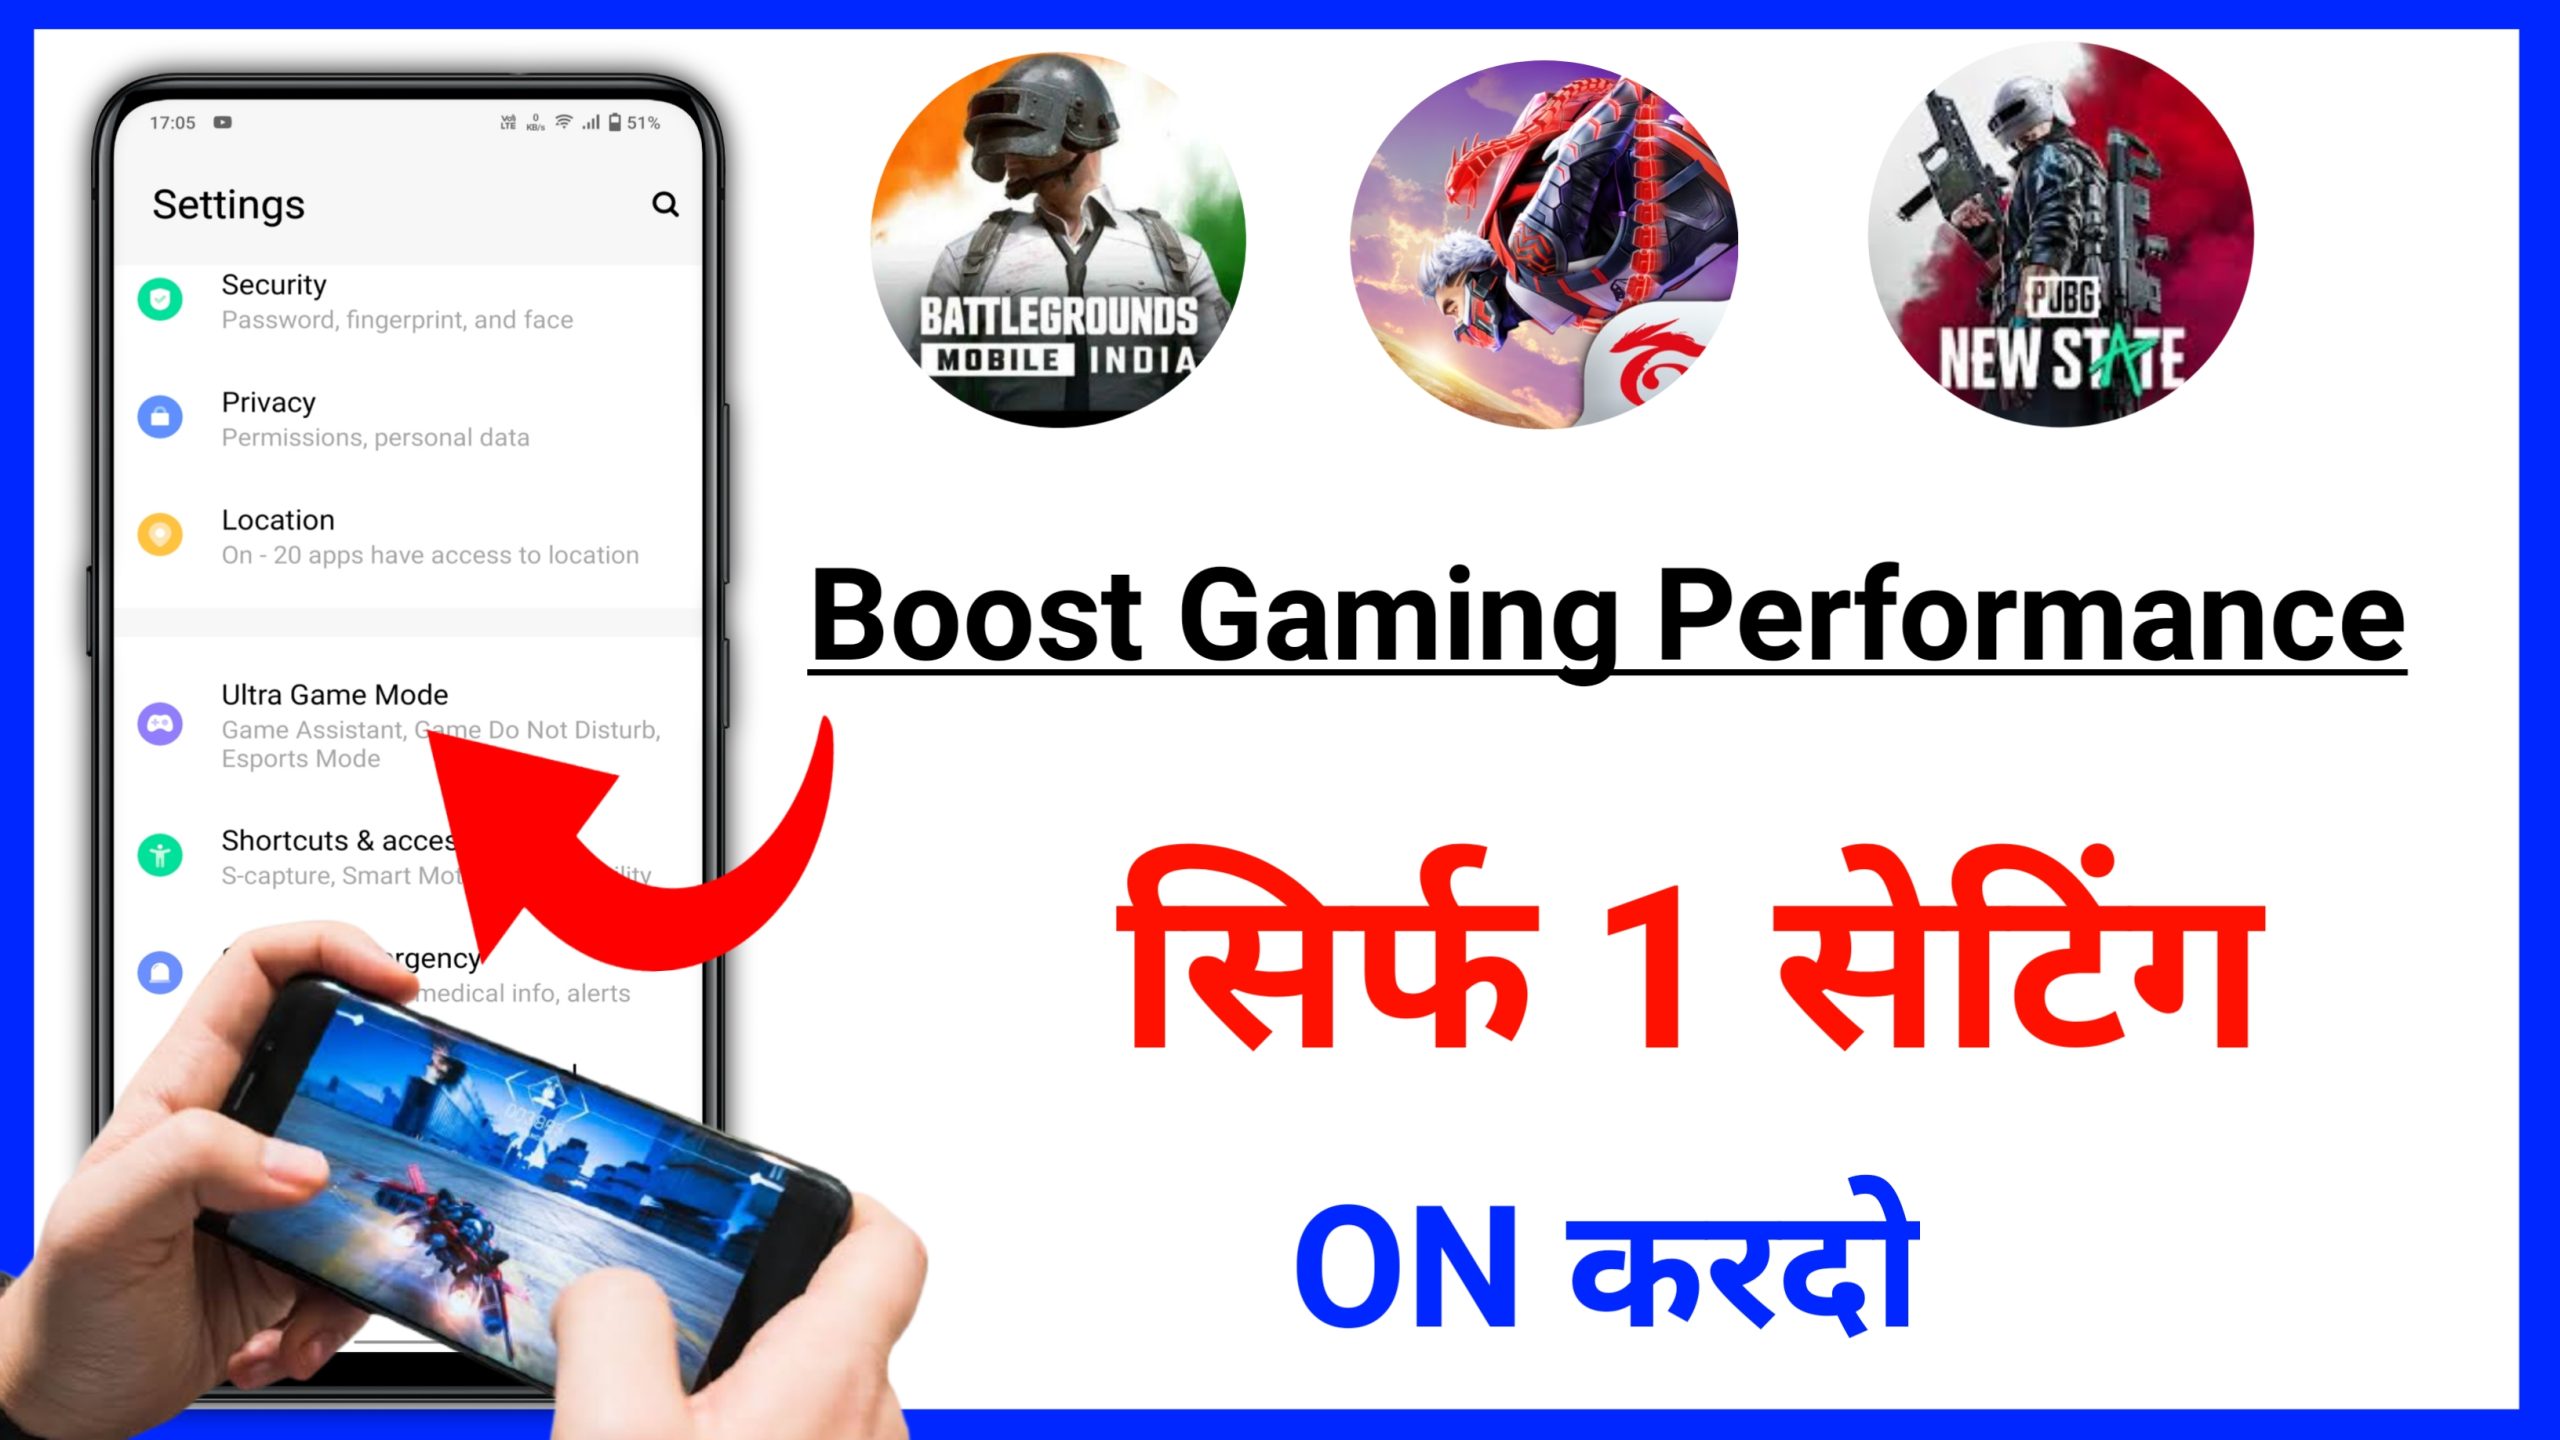 How to Boost Gaming Performance in Android | Android Gaming Performance kaise Boost Kare